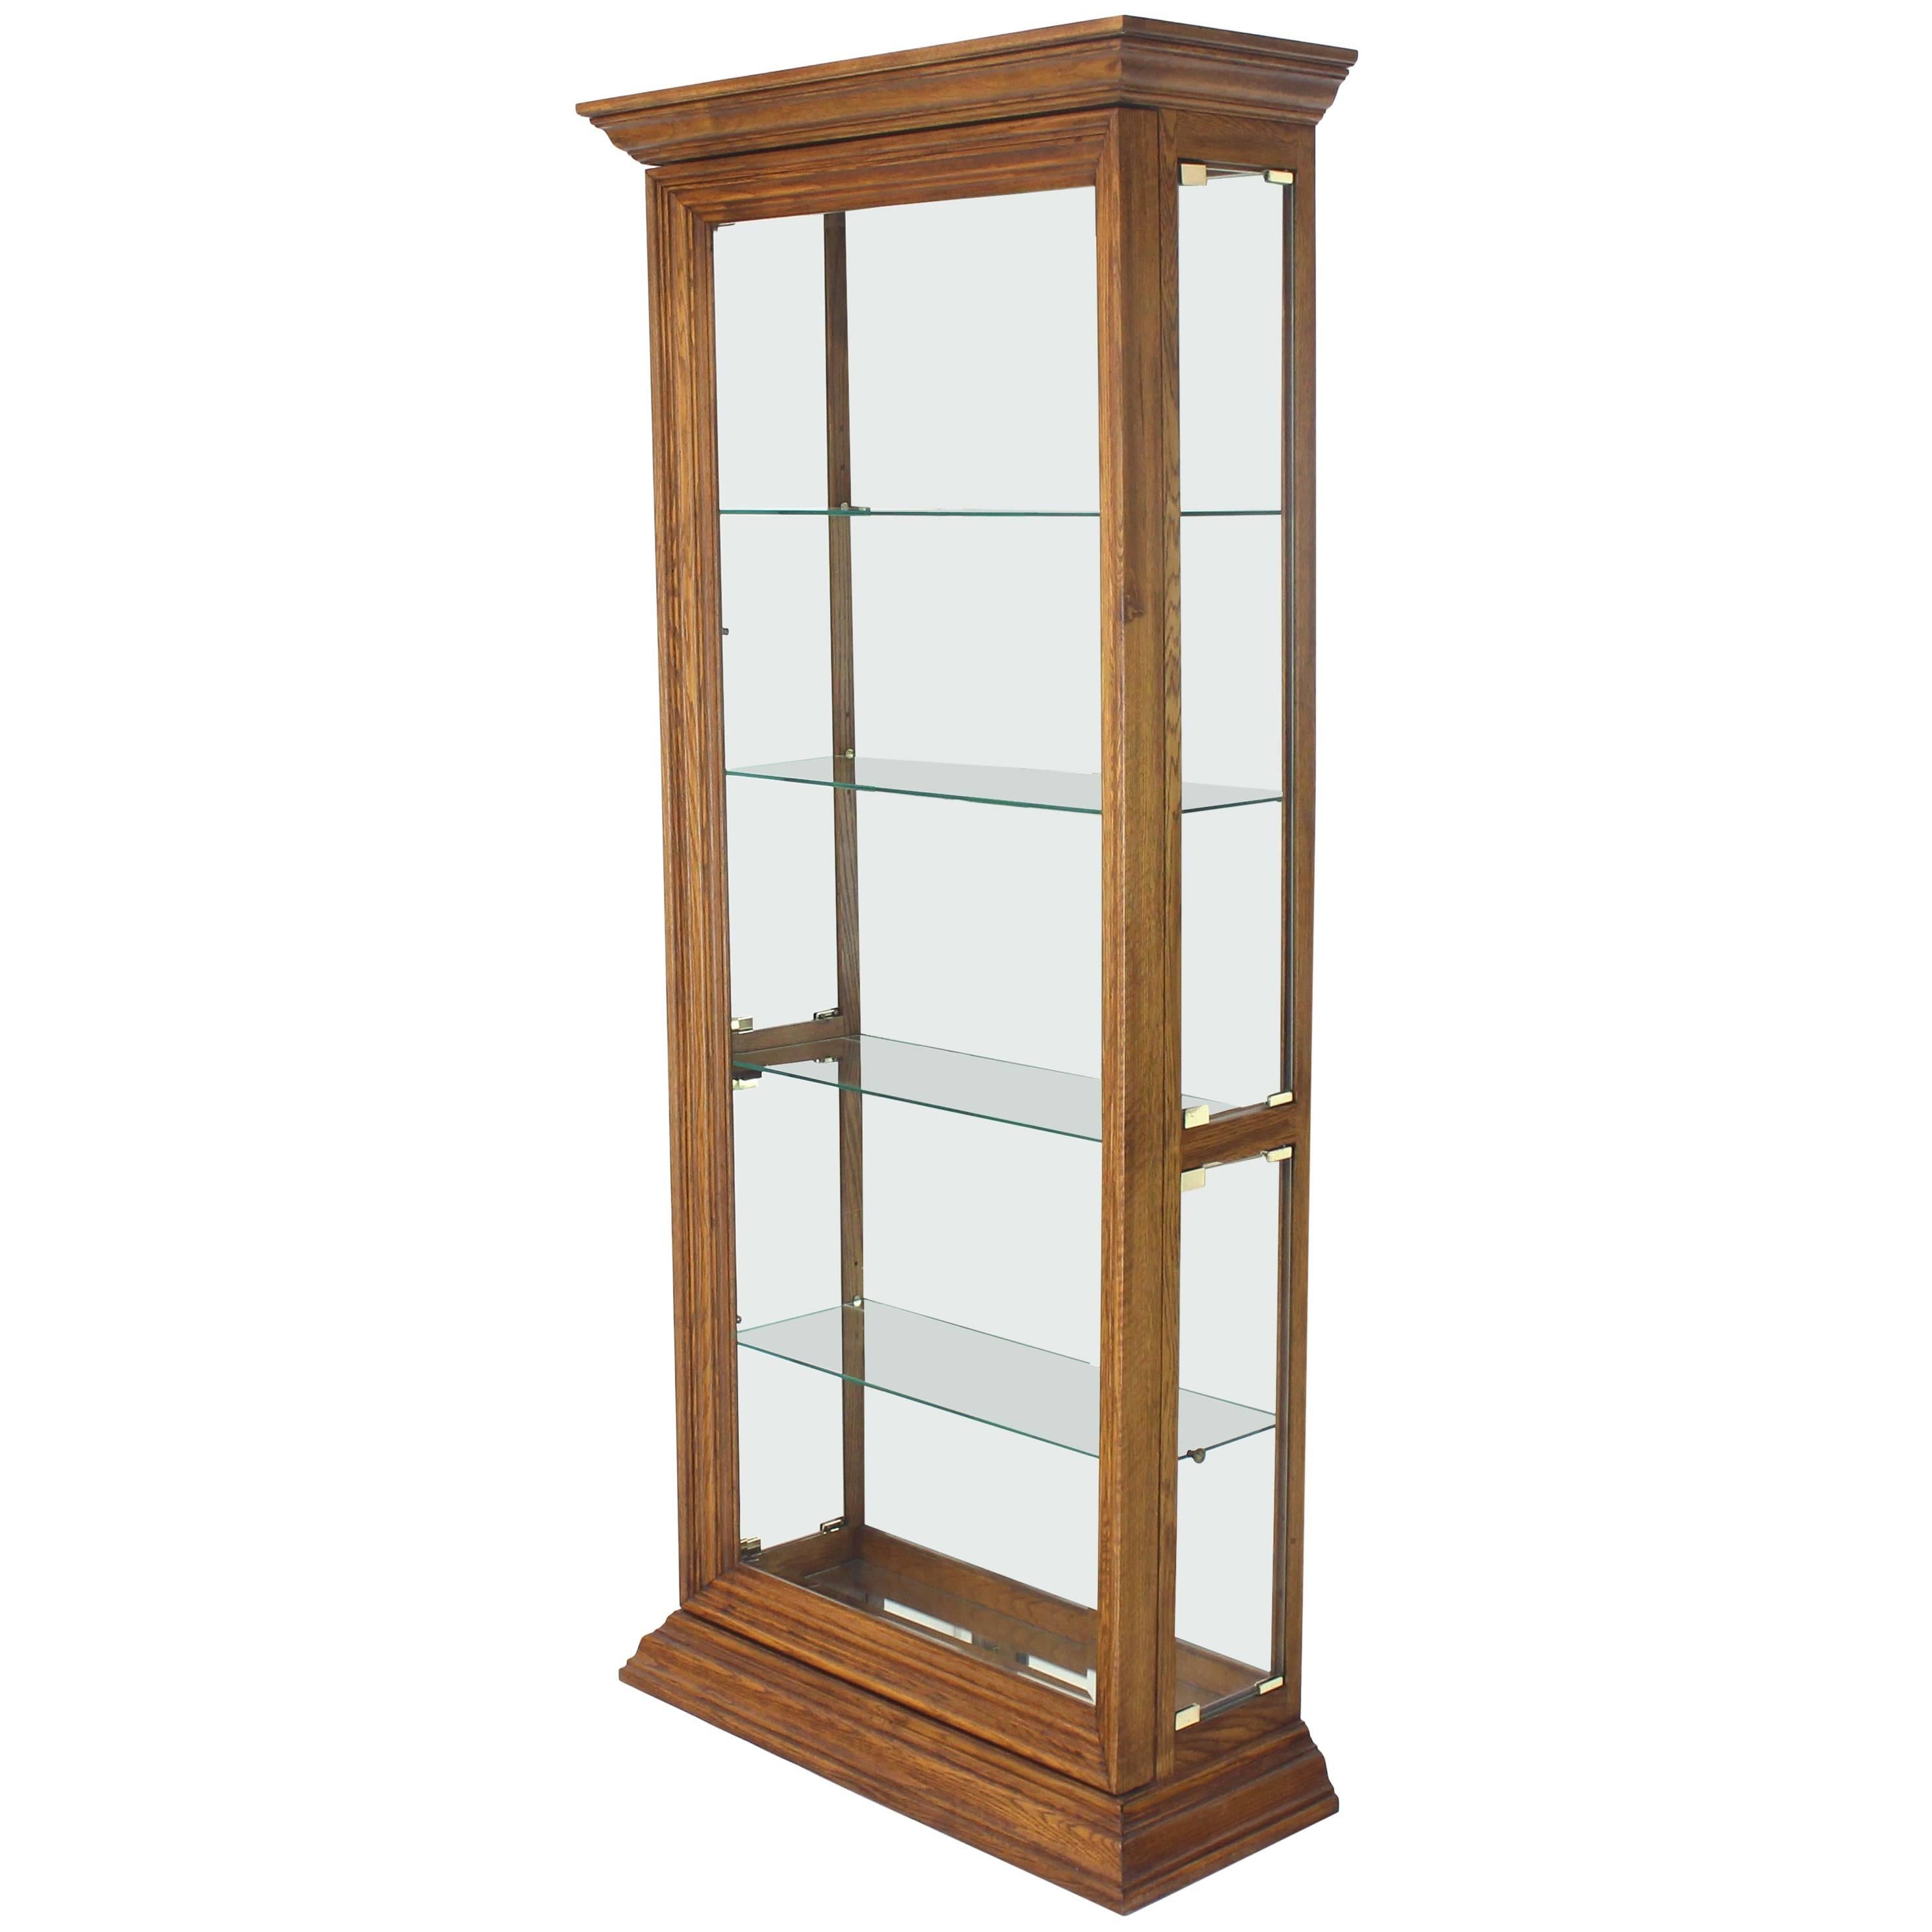 Bookcase Tall Glass Door 3 For, Tall Bookcase With Glass Doors Uk